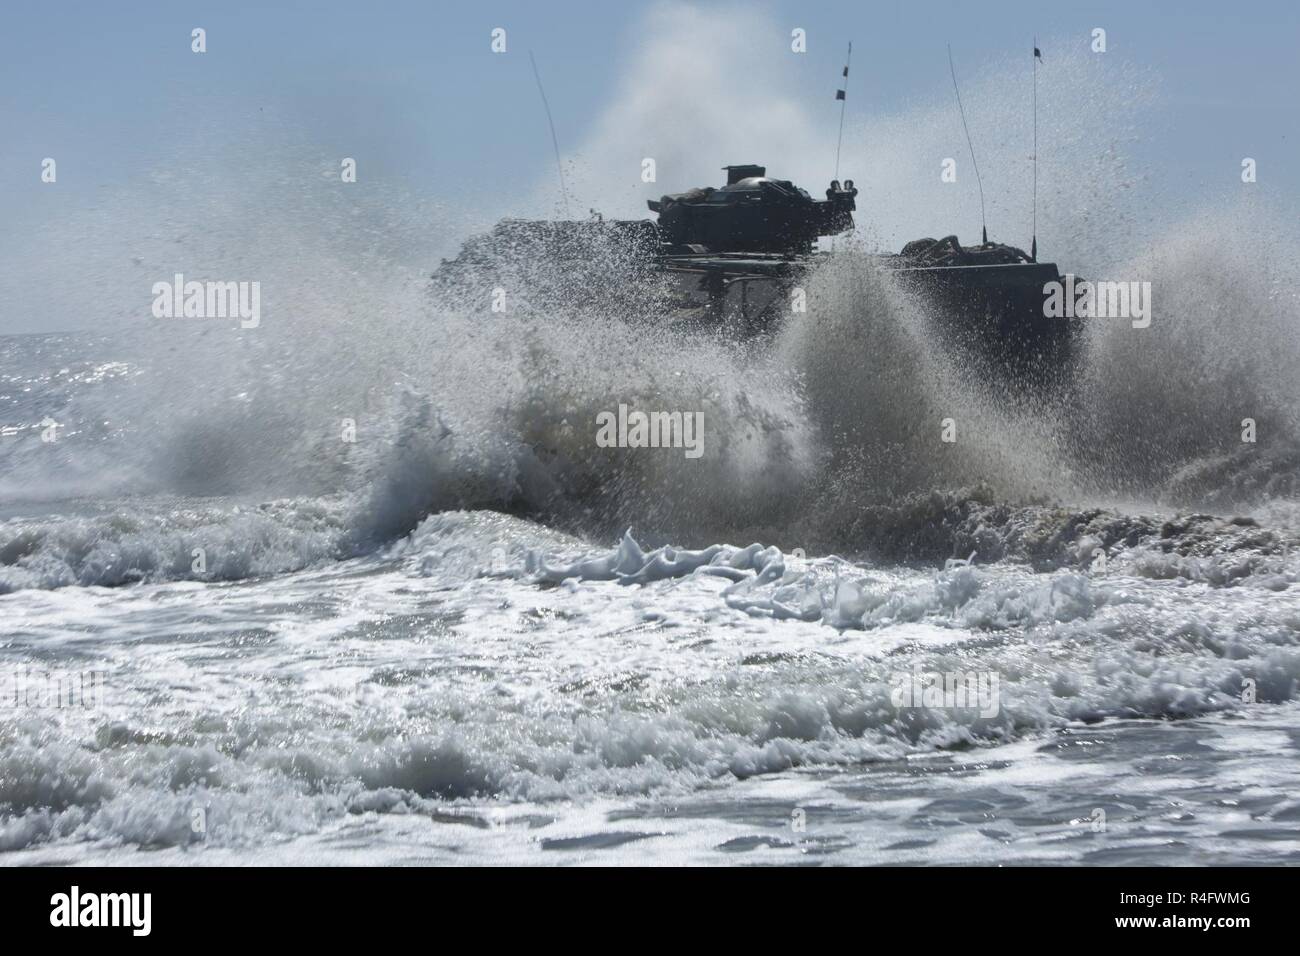 U.S. Marines with 2nd Assault Amphibian Battalion, 2nd Marine Division, (2d MARDIV), conduct an amphibious movement aboard an Assault Amphibious Vehicle (AAV-7A1) as part of Marine Corps Combat Readiness Evaluation, (MCCRE), Camp Lejeune, N.C., Oct. 24, 2016. MCCRE is a pre-deployment training evaluation designed to test the skills of Marines and Sailors with possible combat scenarios. Stock Photo